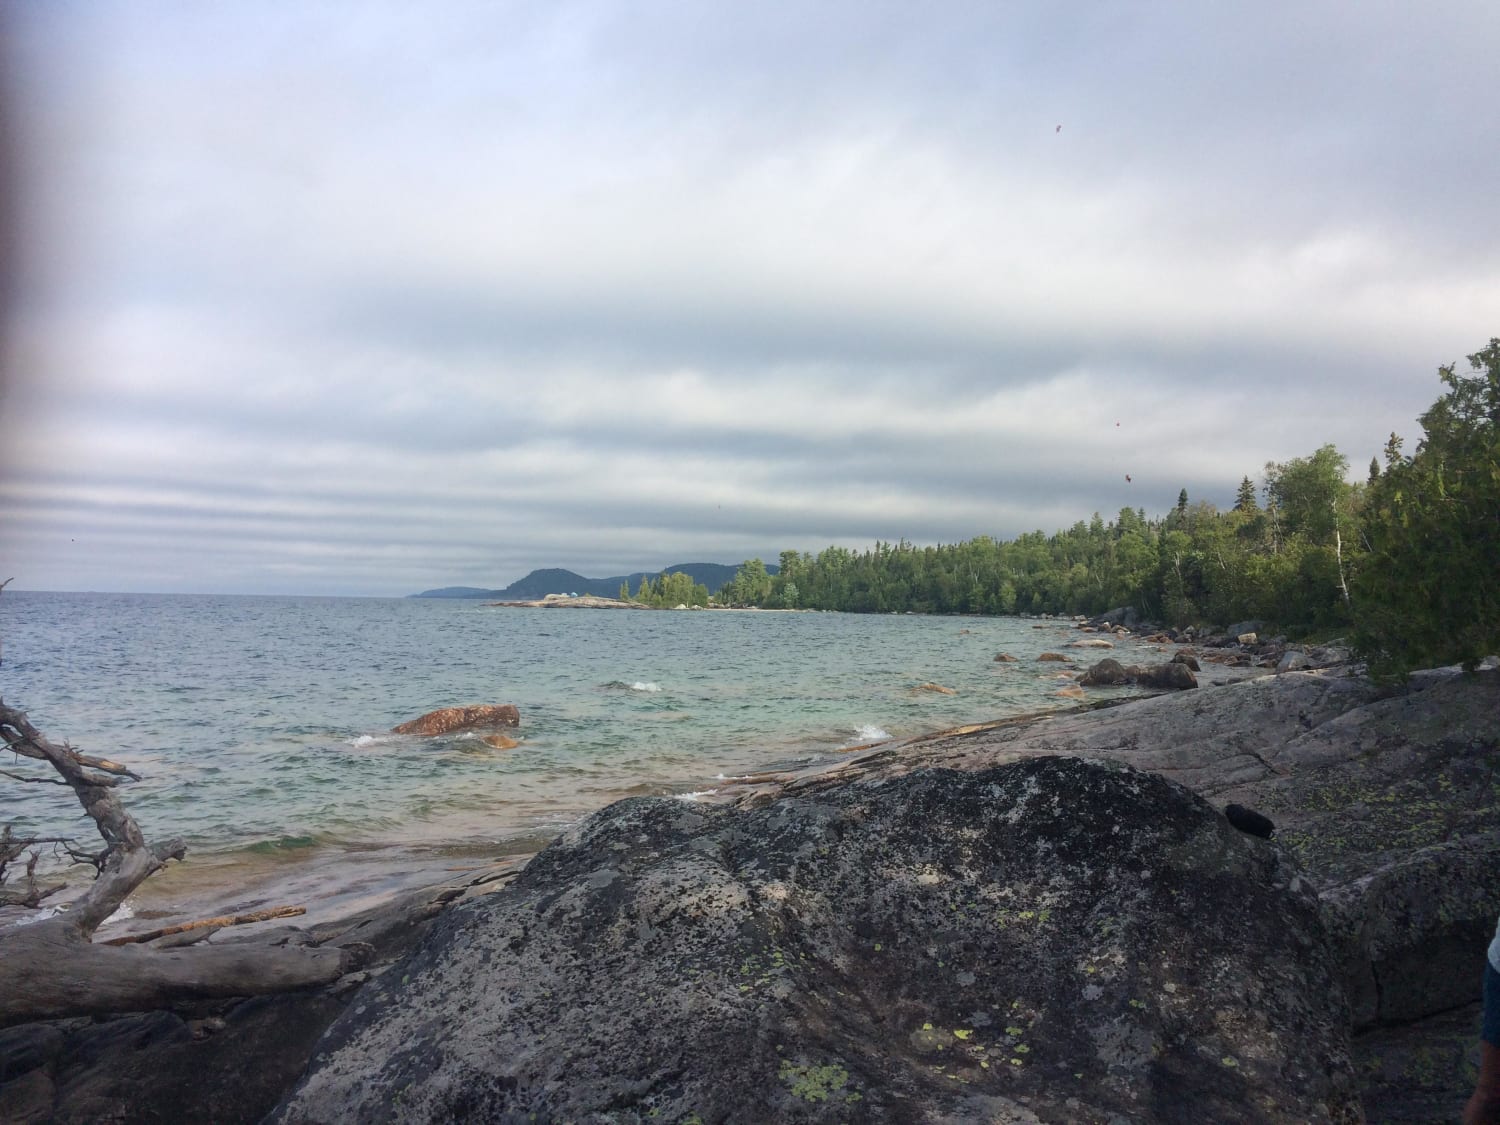 Lake Superior 56 miles from the nearest town. 15 miles from the nearest road.